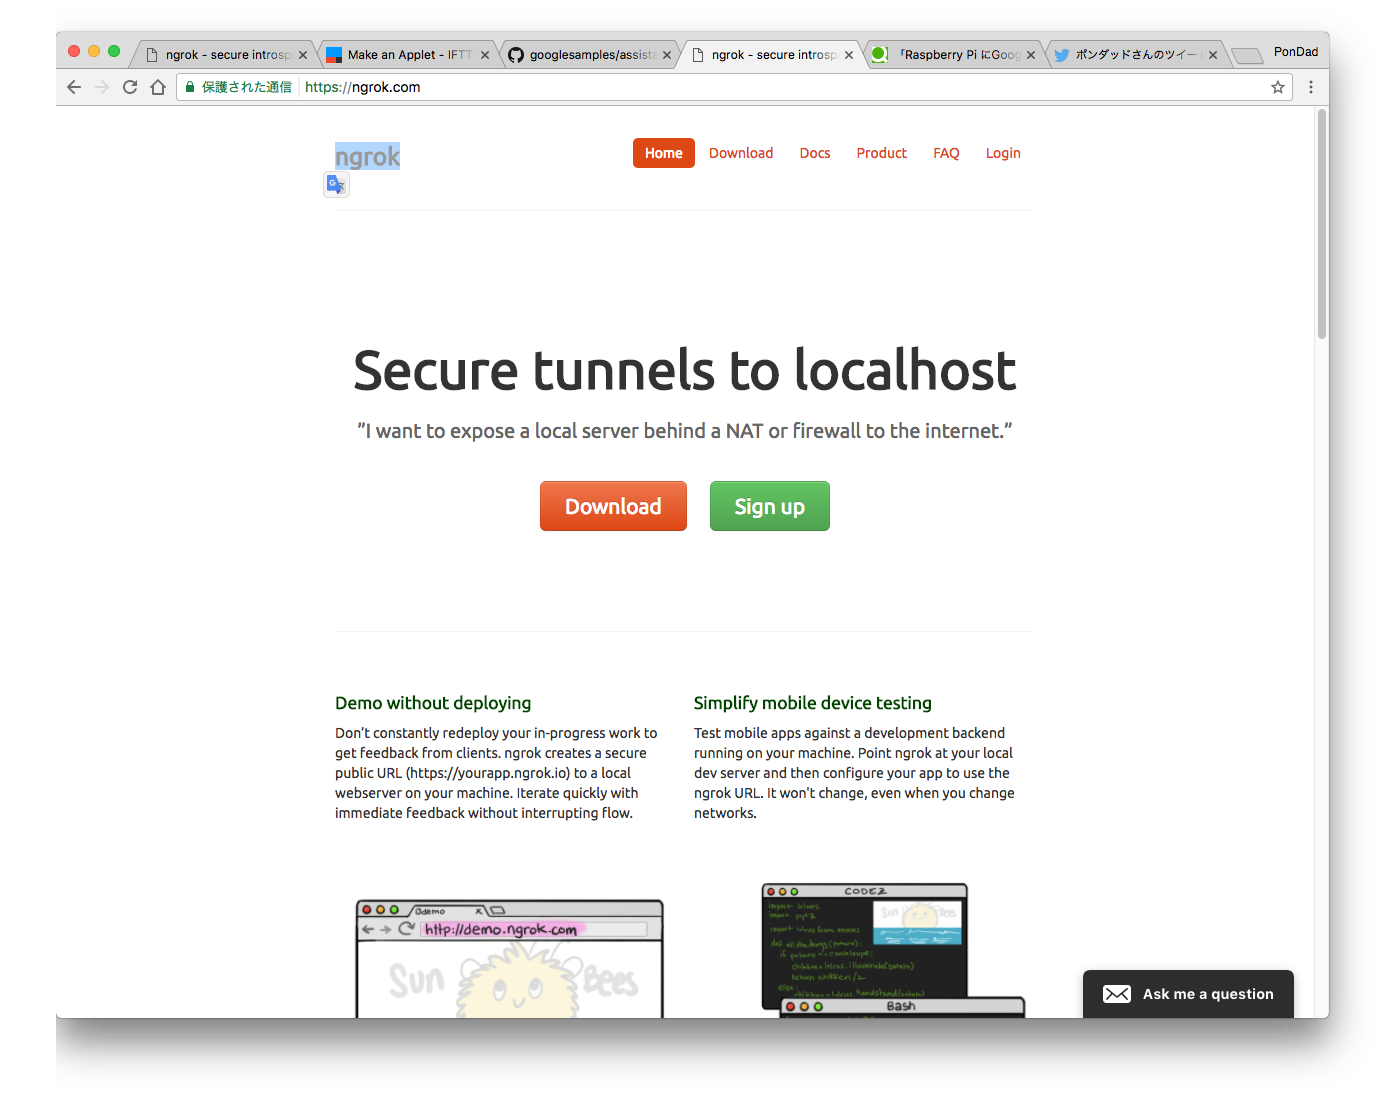 ngrok - secure introspectable tunnels to localhost 2017-04-29 23-59-44.png